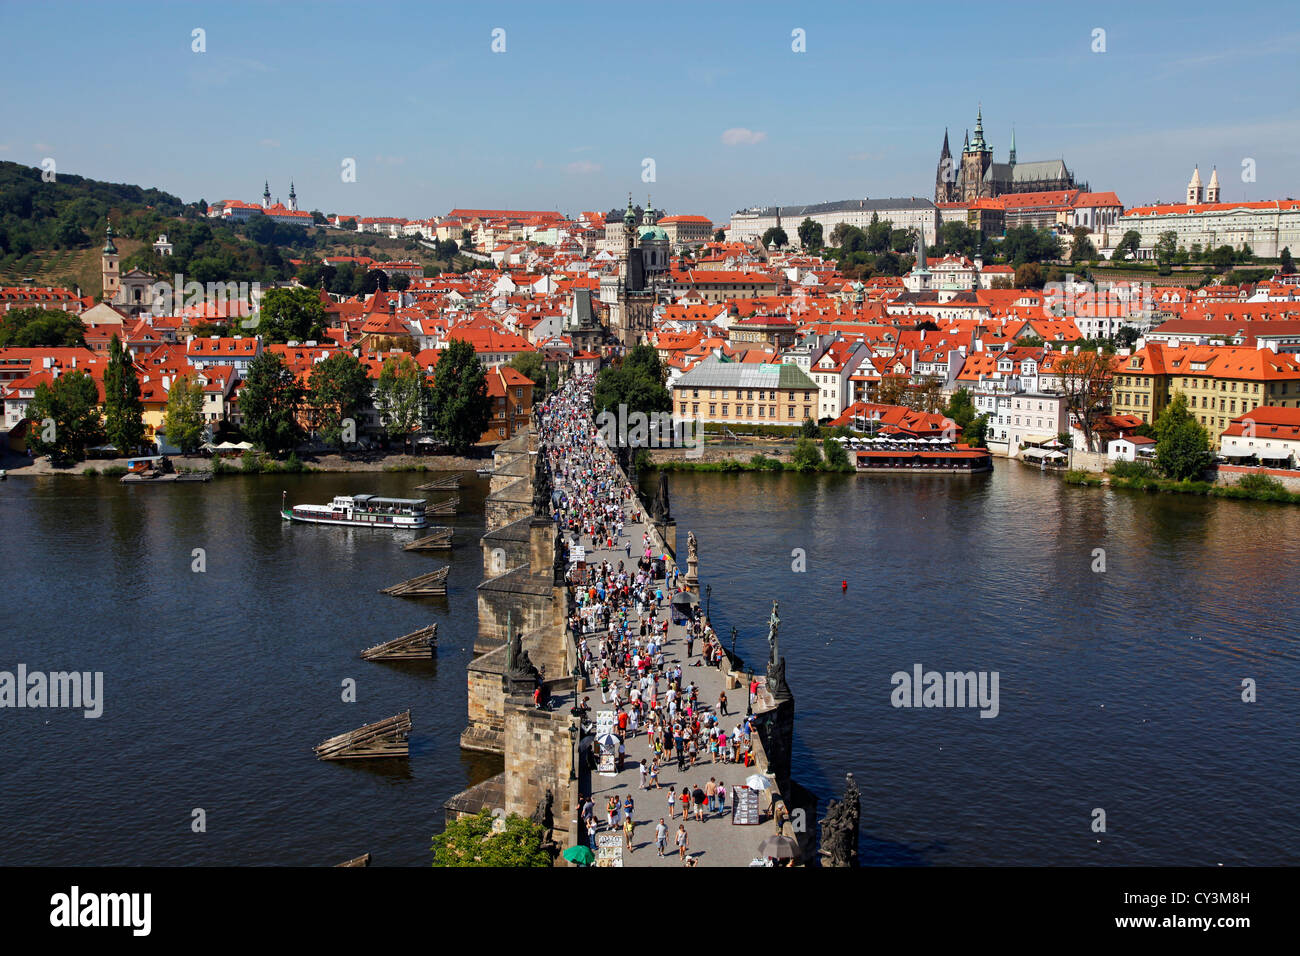 St. Vitus Cathedral and Prague Castle skyline with the Charles Bridge and Vtlava River in Prague, Czech Republic Stock Photo